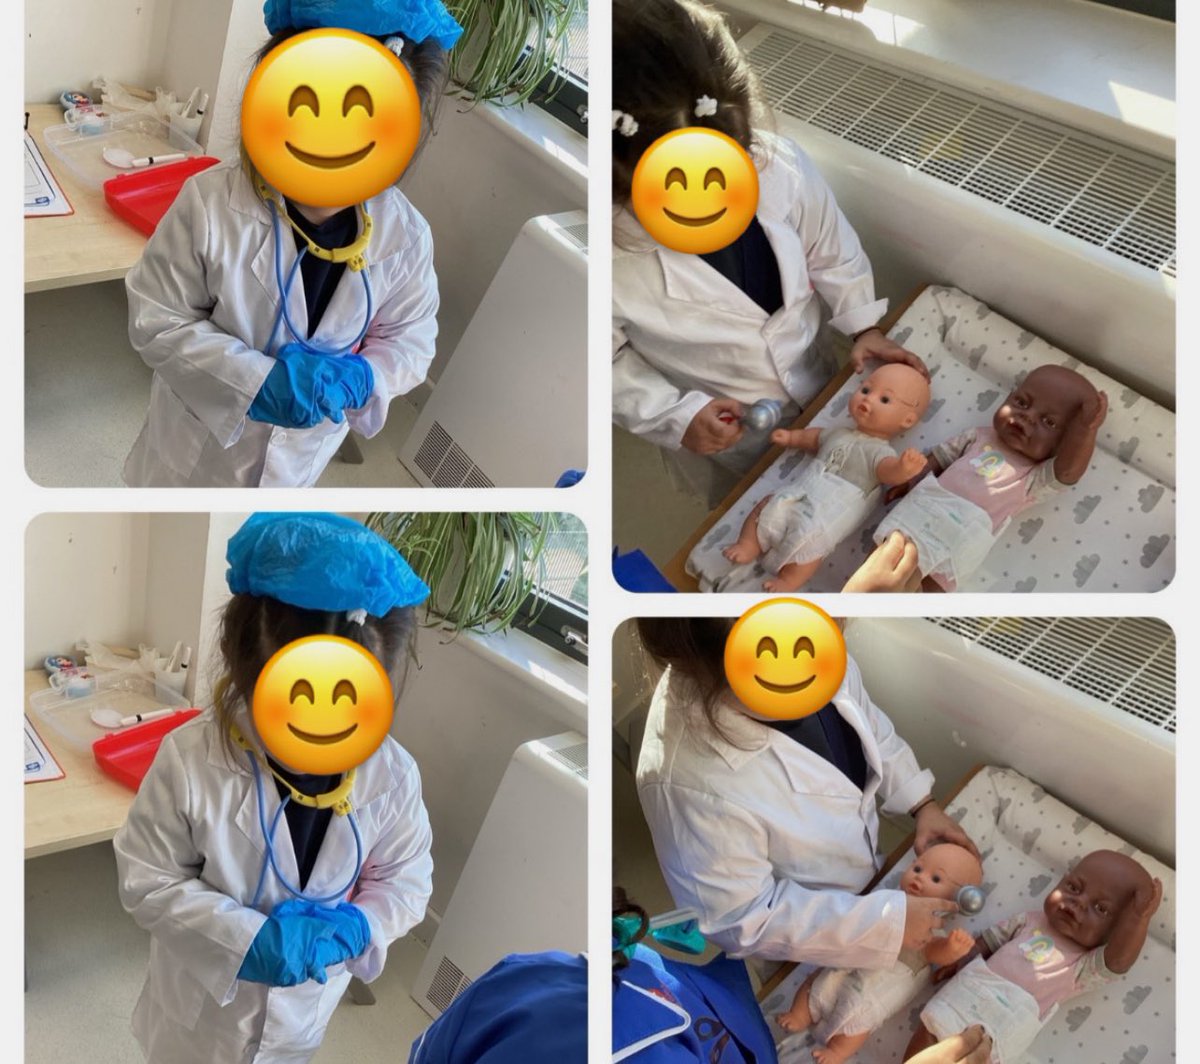 This week Nursery have been learning about people who help us. We’ve loved taking on the role of Doctors and Nurses and taking care of the babies in our care.  #afsprimary #loveoflearning #roleplay #coreprinciples